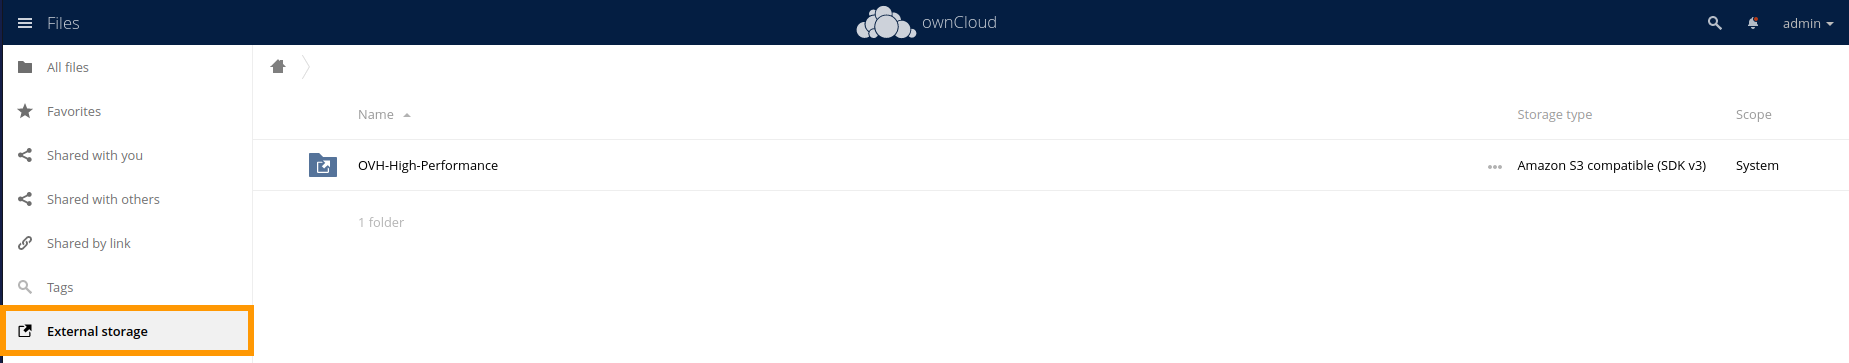 openioowncloud8.png